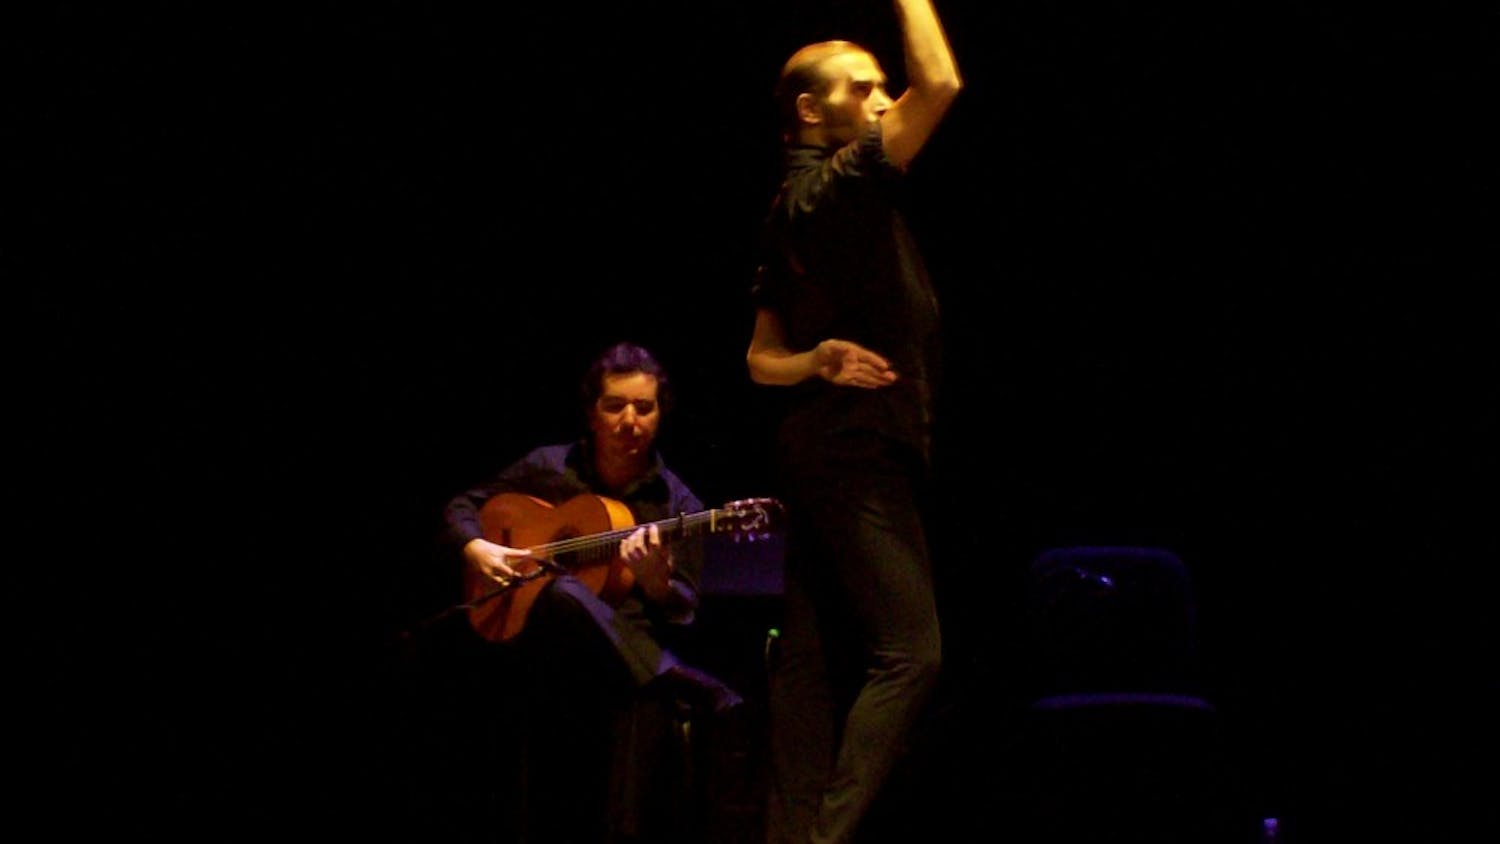 SONG AND DANCE â€” Spanish dance took over GWUâ€™s Lisner Auditorium this past week at the Flamenco Festival.  Originated in southern Spain, flamenco has been gaining in popularity world-wide. Performers such as Israel GalvÃ¡n showed D.C. their own take on flamenco dancing.